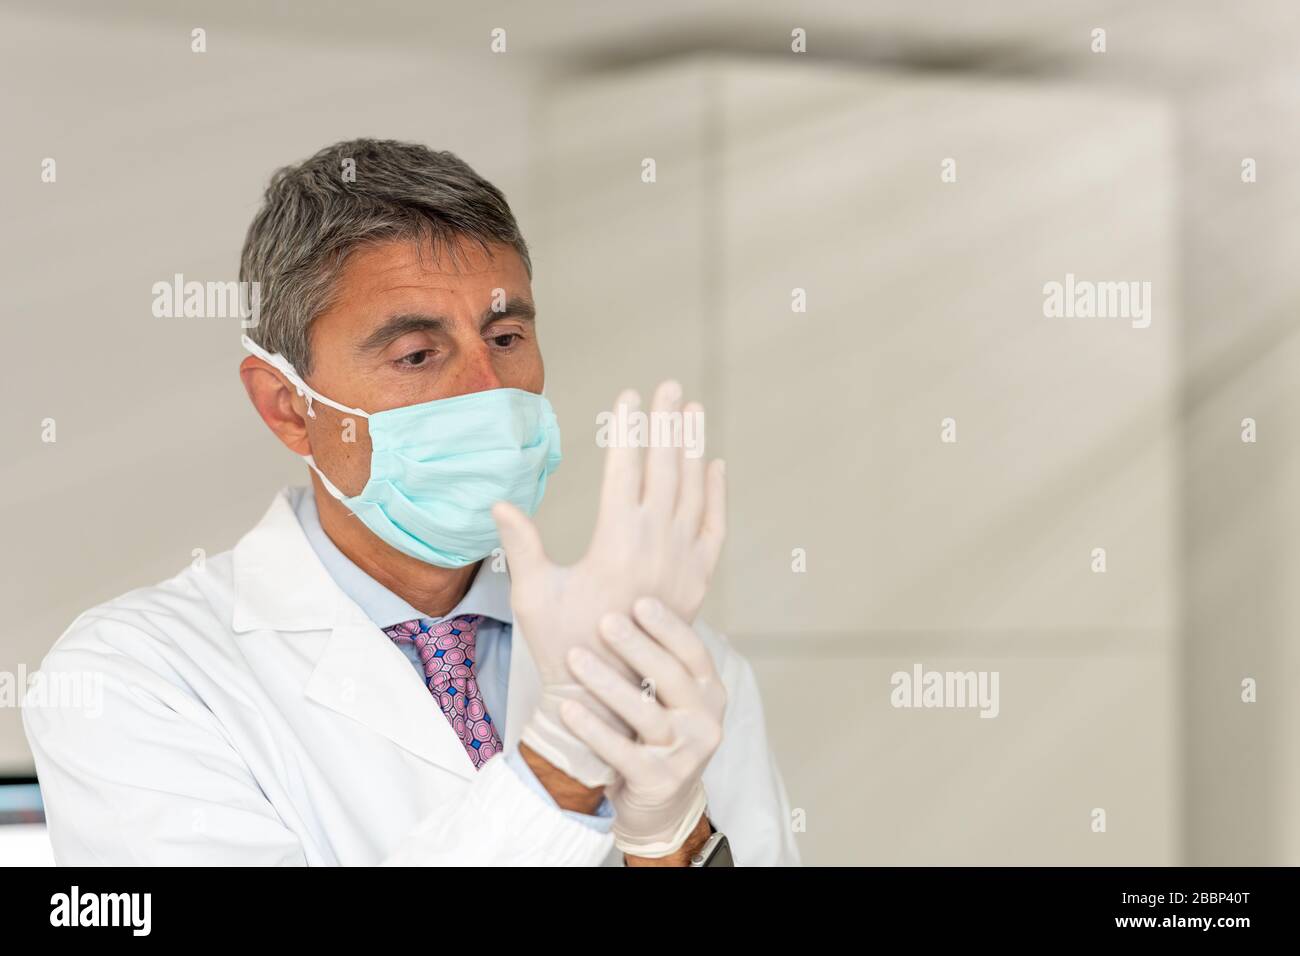 Confident doctor wearing mask and gloves at the medical studio in coronavirus times. Stock Photo